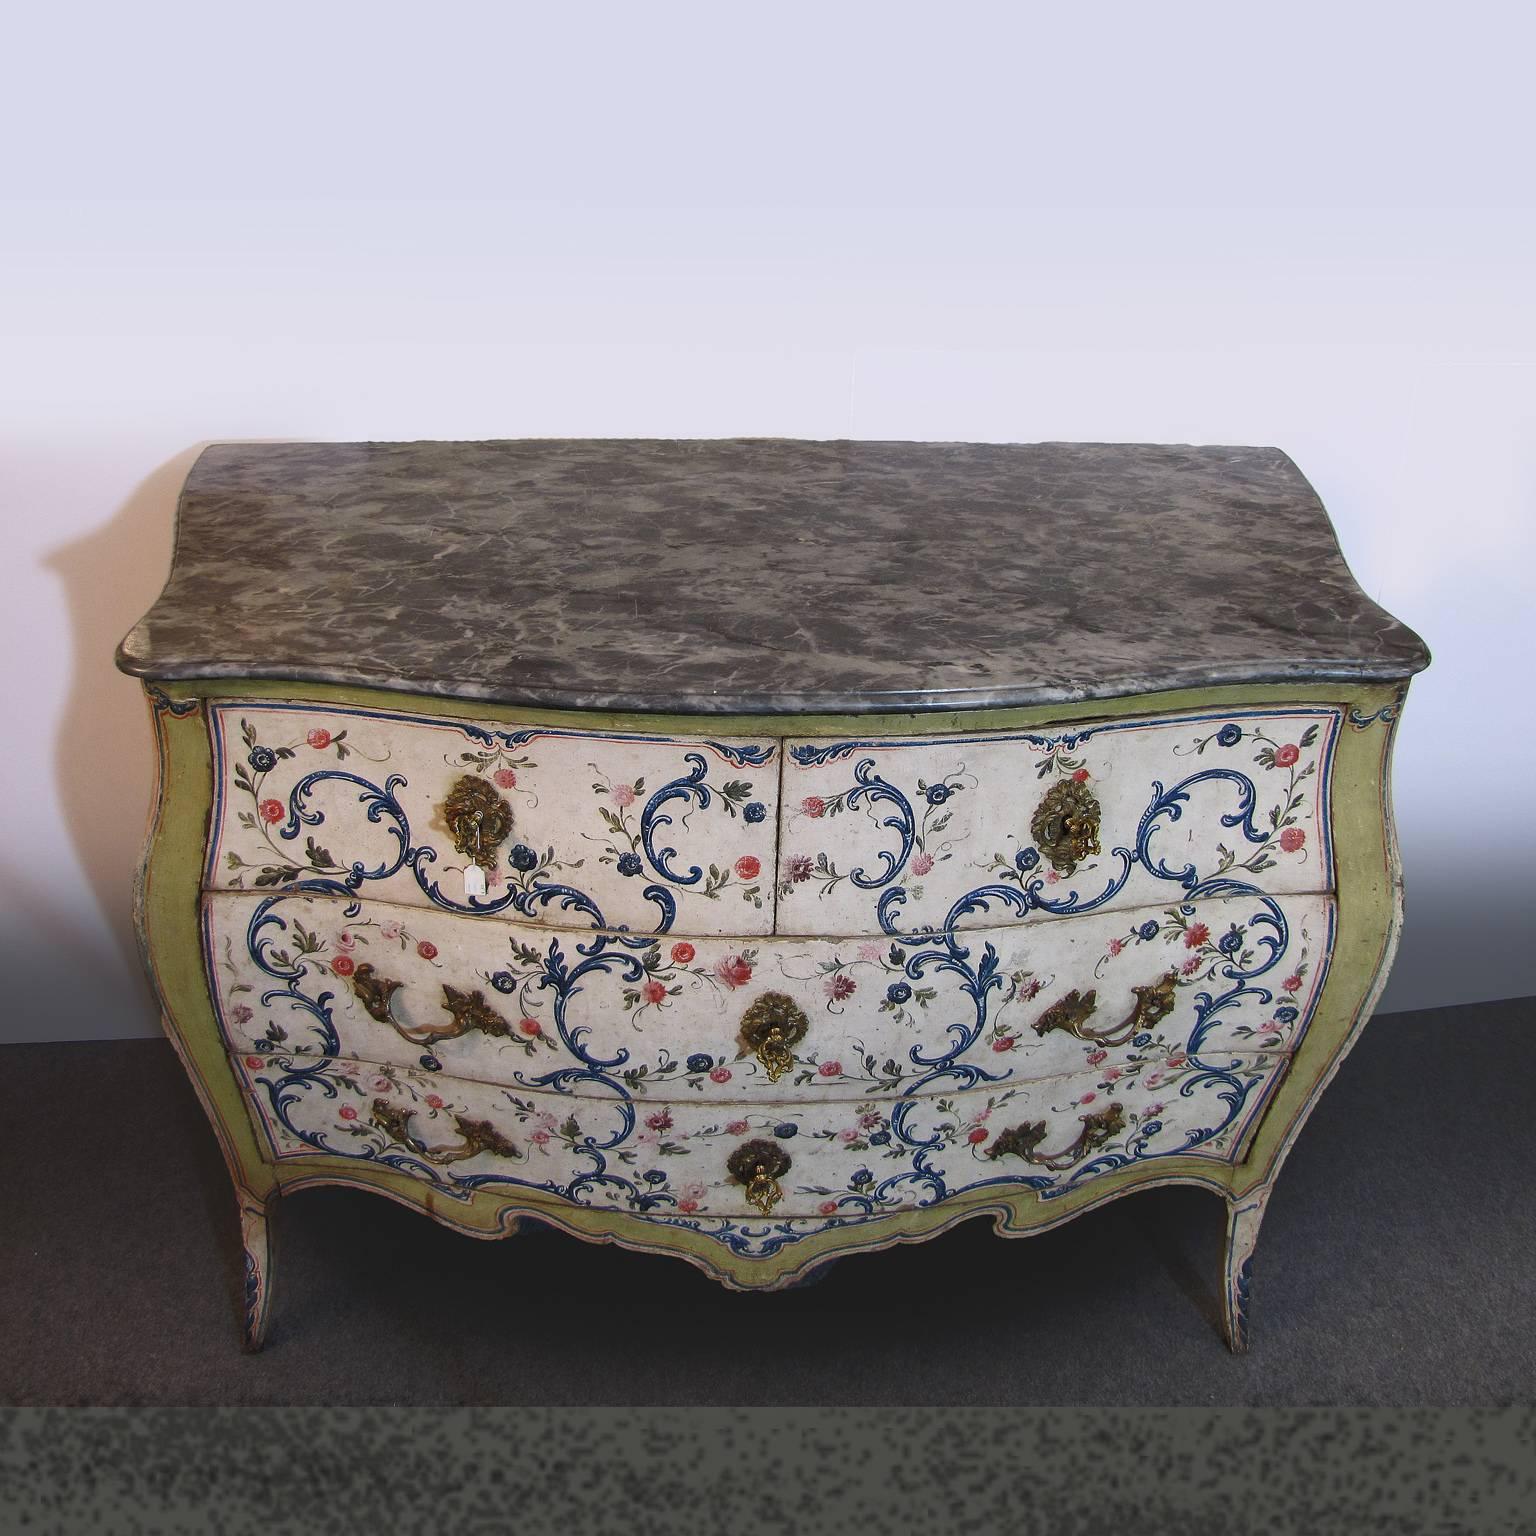 A Genoese bombe chest of drawers in finely painted poplar wood.
The case with four drawers, two large ones at the bottom and two small ones at the top, is decorated with a serpentine on the front and it is surmounted by a grey marble top “Grigio